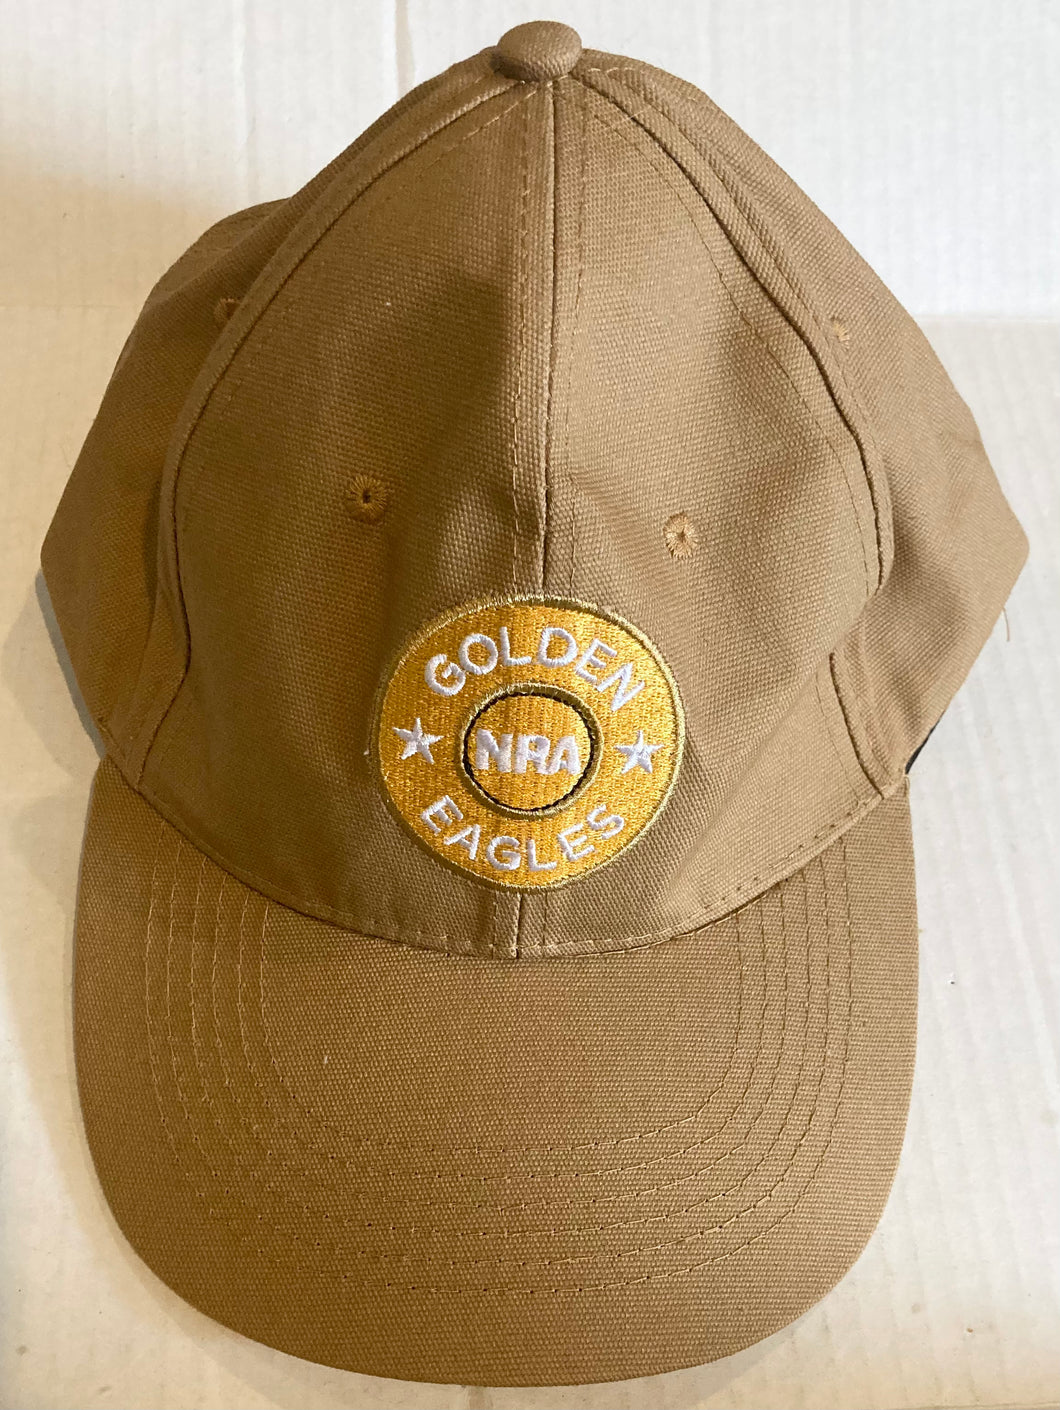 NEA Golden Eagles Hat Ballcap Tan Adults One Size Embroidery Patches